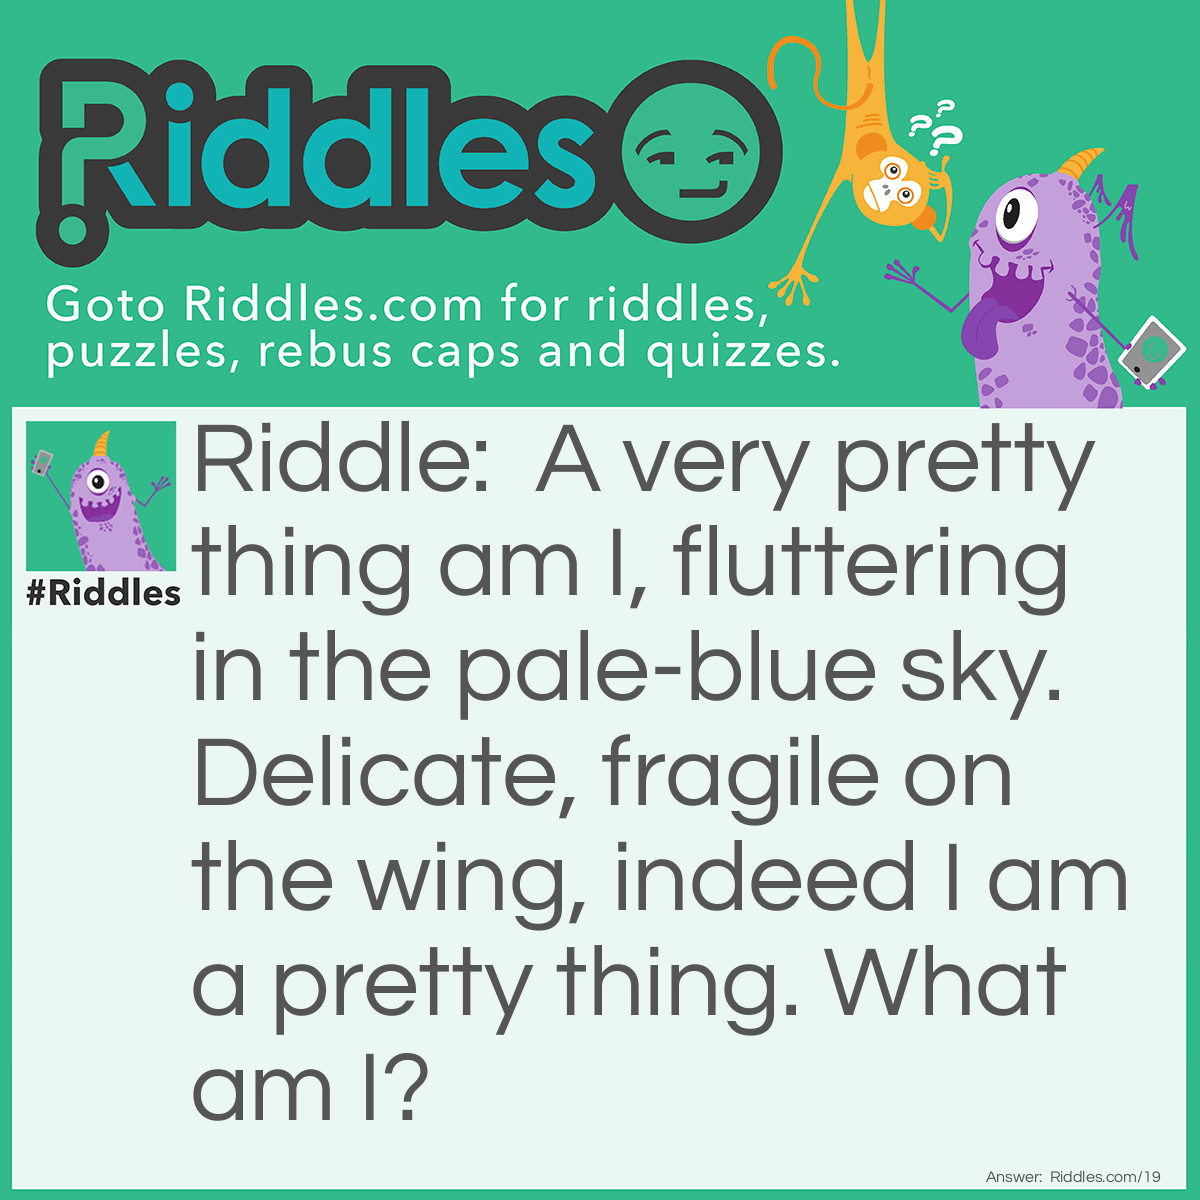 Riddle: A very pretty thing am I, fluttering in the pale-blue sky. Delicate, fragile on the wing, indeed I am a pretty thing. What am I? Answer: I am a Butterfly.